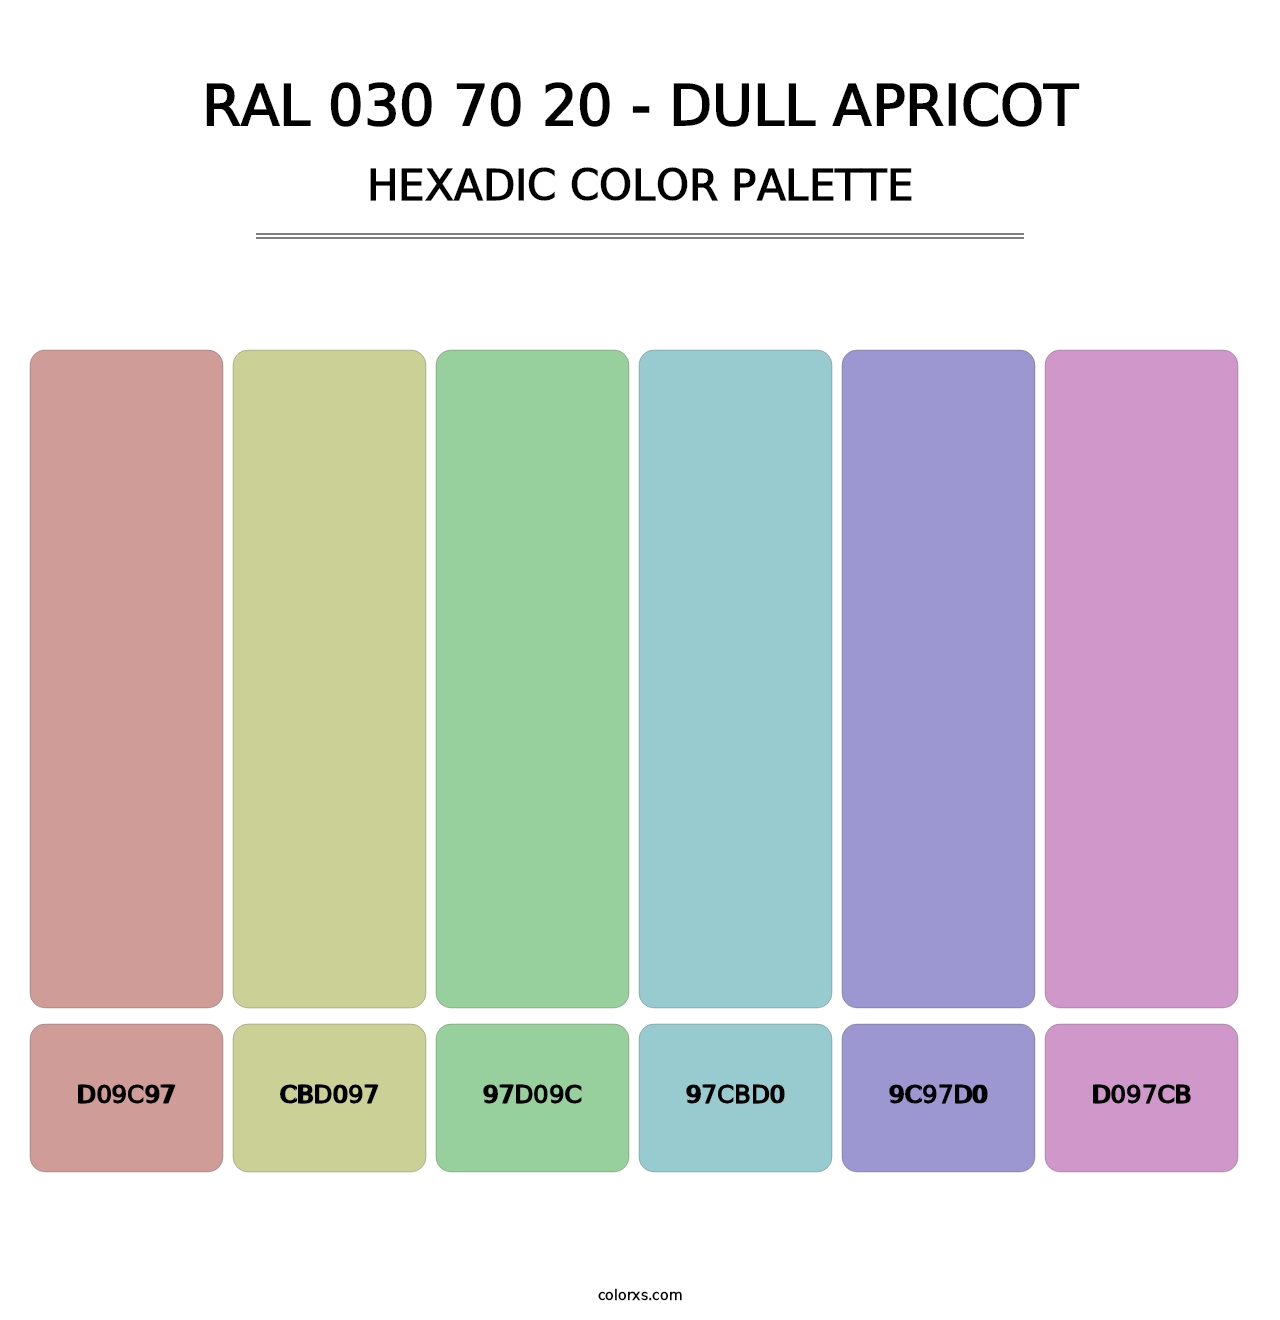 RAL 030 70 20 - Dull Apricot - Hexadic Color Palette